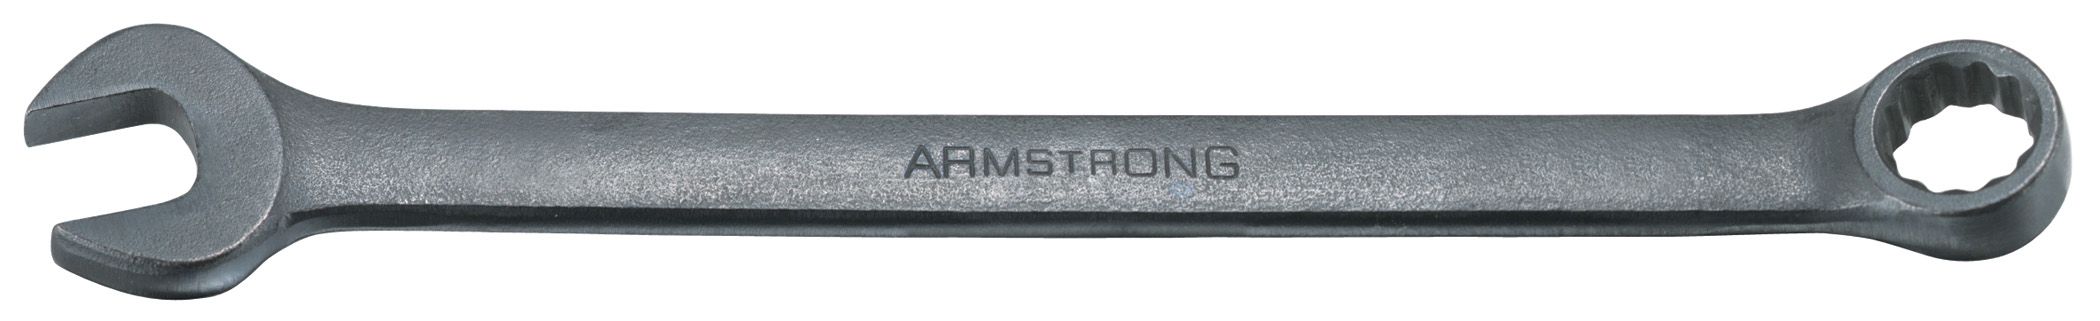 Armstrong 9/16 in. 12 pt. Black Oxide Long Combination Wrench